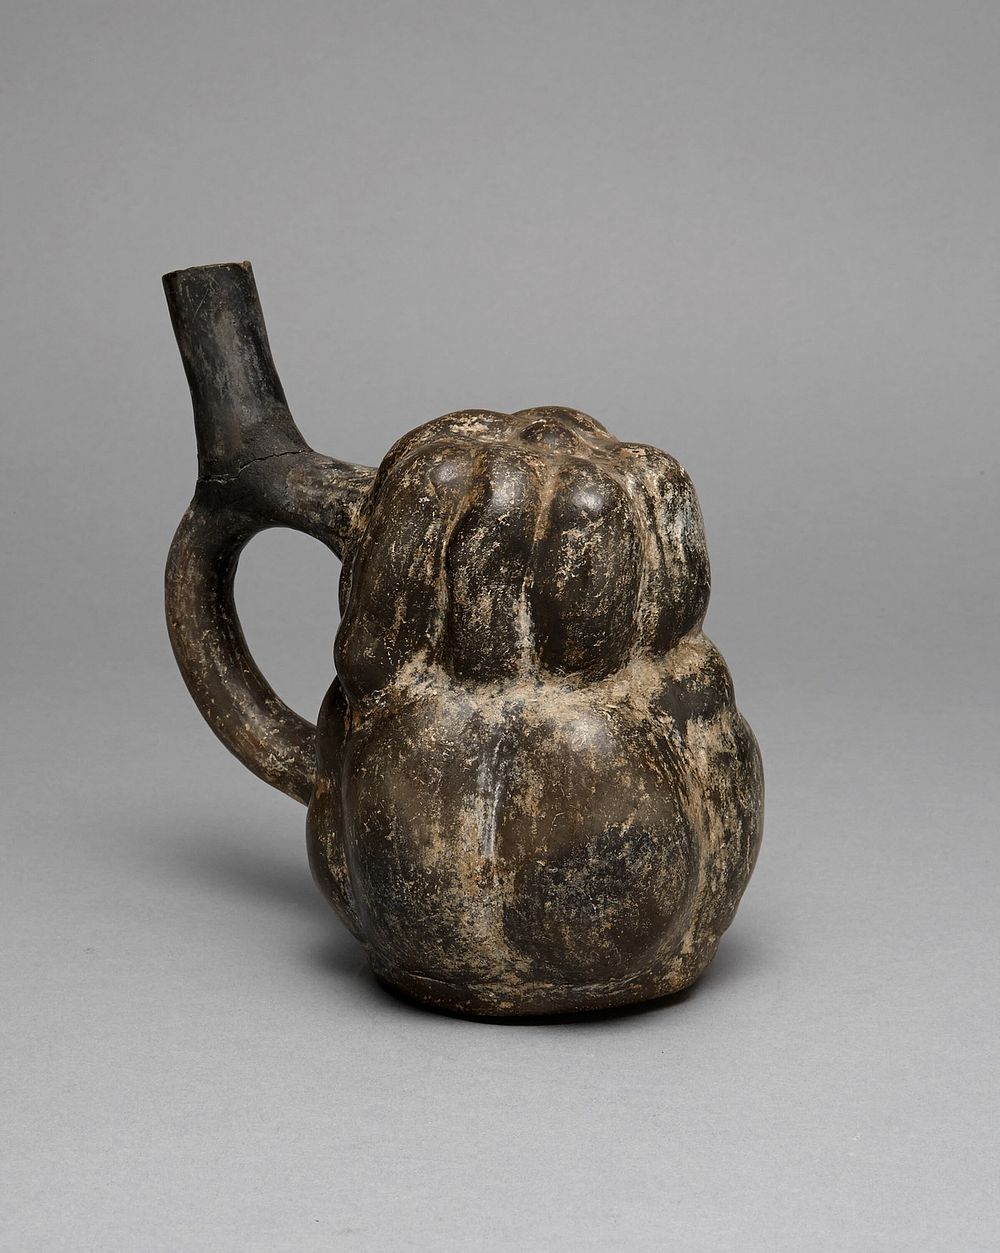 Spout Vessel in the Form of a Gourd by Moche